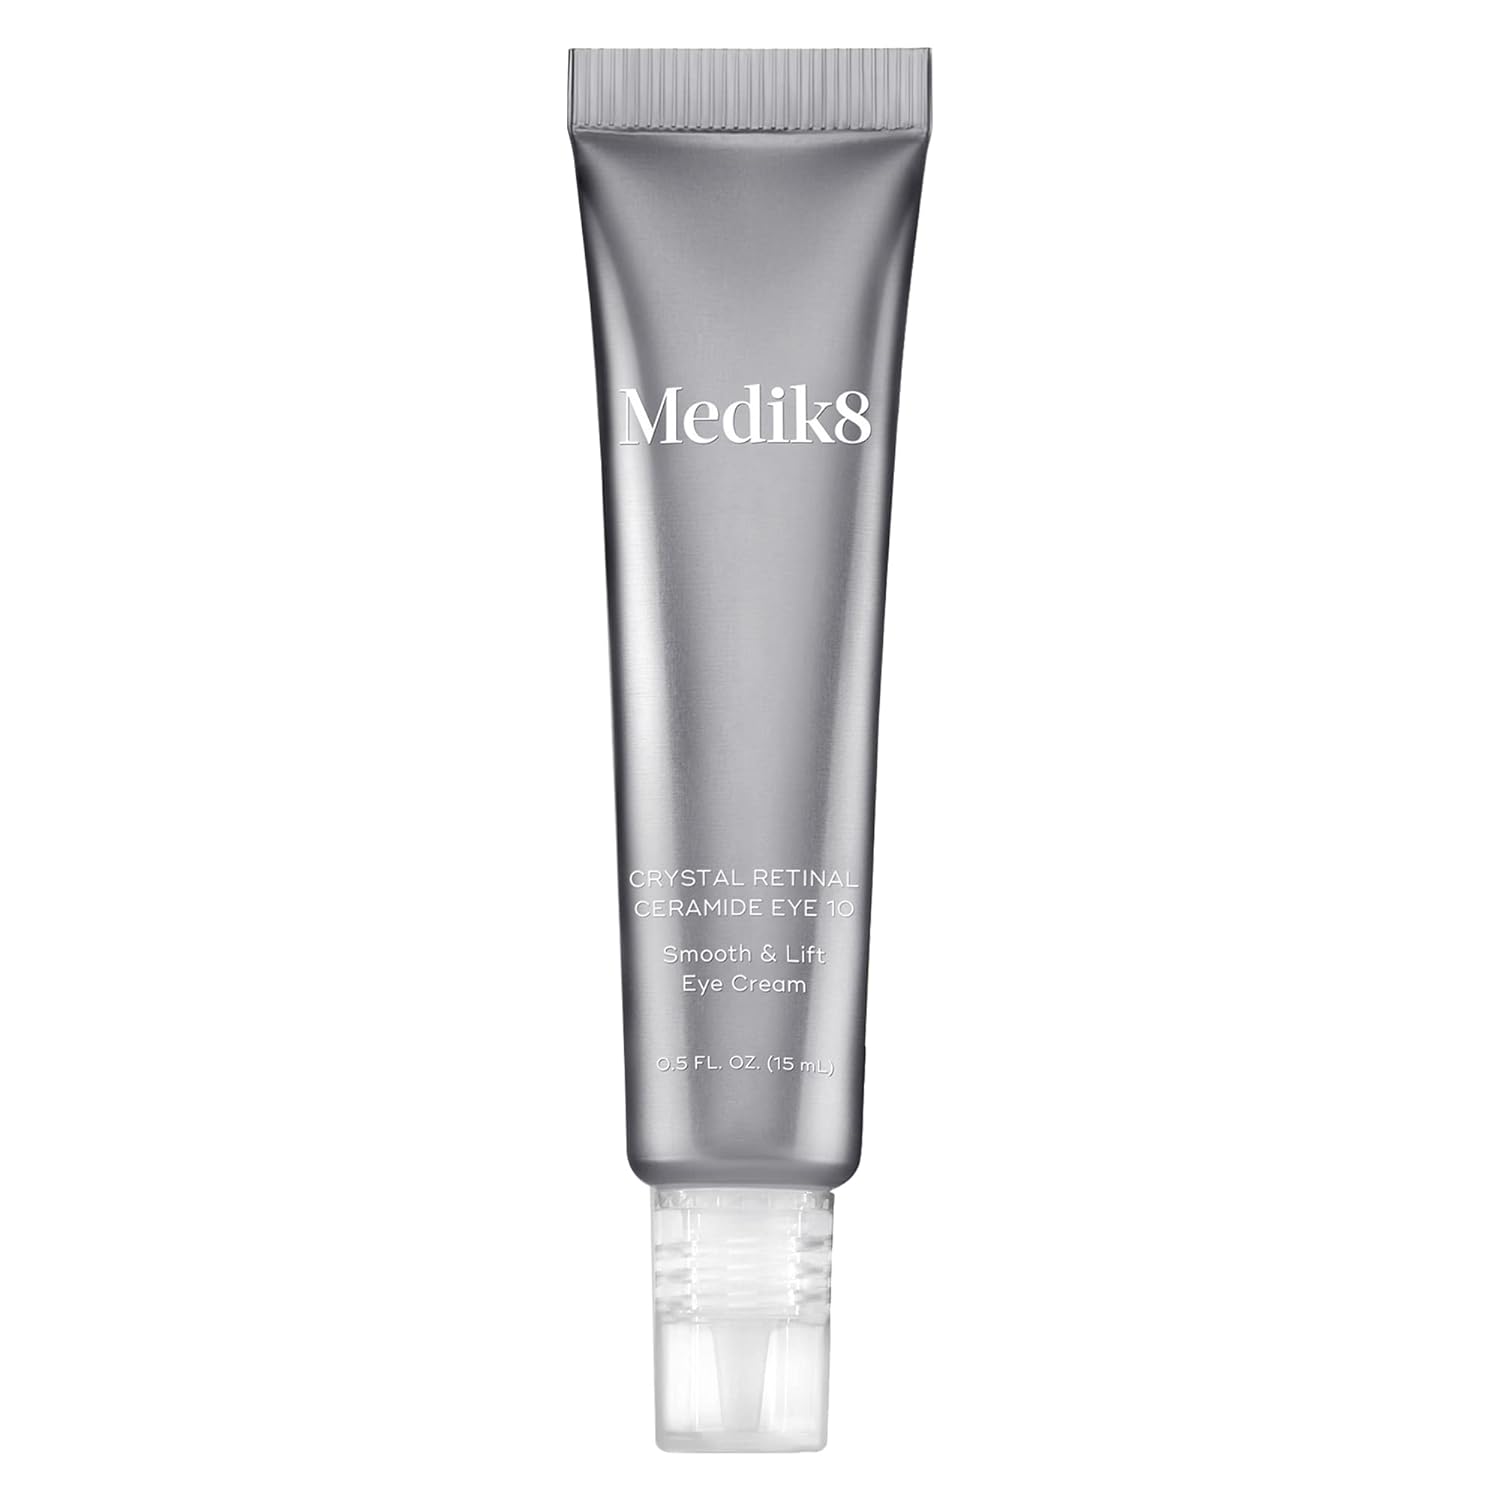 Medik8 Crystal Retinal Ceramide Eye 10 - Smooth and Lift Cream - Gentle Release Vitamin A - Delivers Visible Brightening Results - Reduces Appearance of Wrinkles - Perfect for Sensitive Skin - 0.5 ml